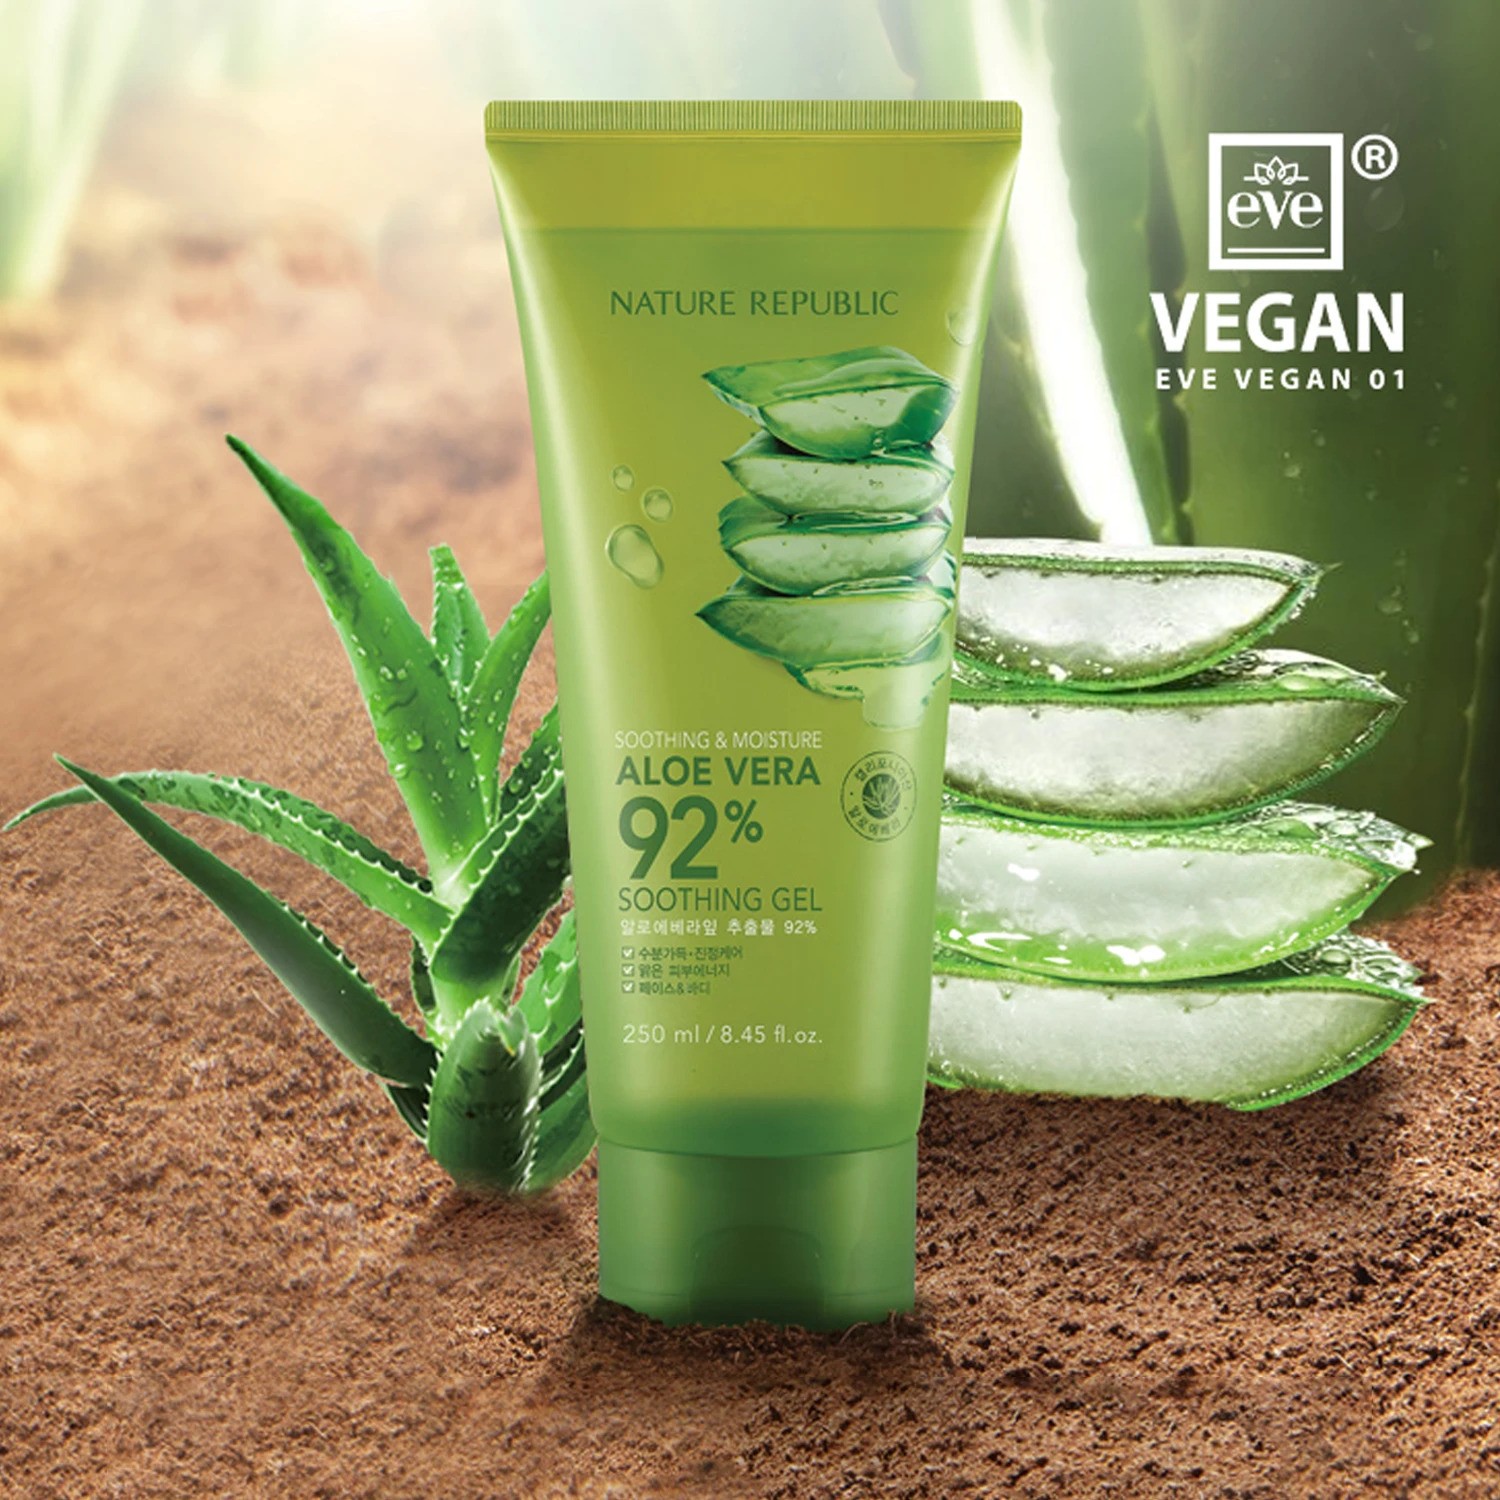 Soothing And Moisture Aloe Vera 92 Soothing Gel Tube Nature Republic Maroc 1879